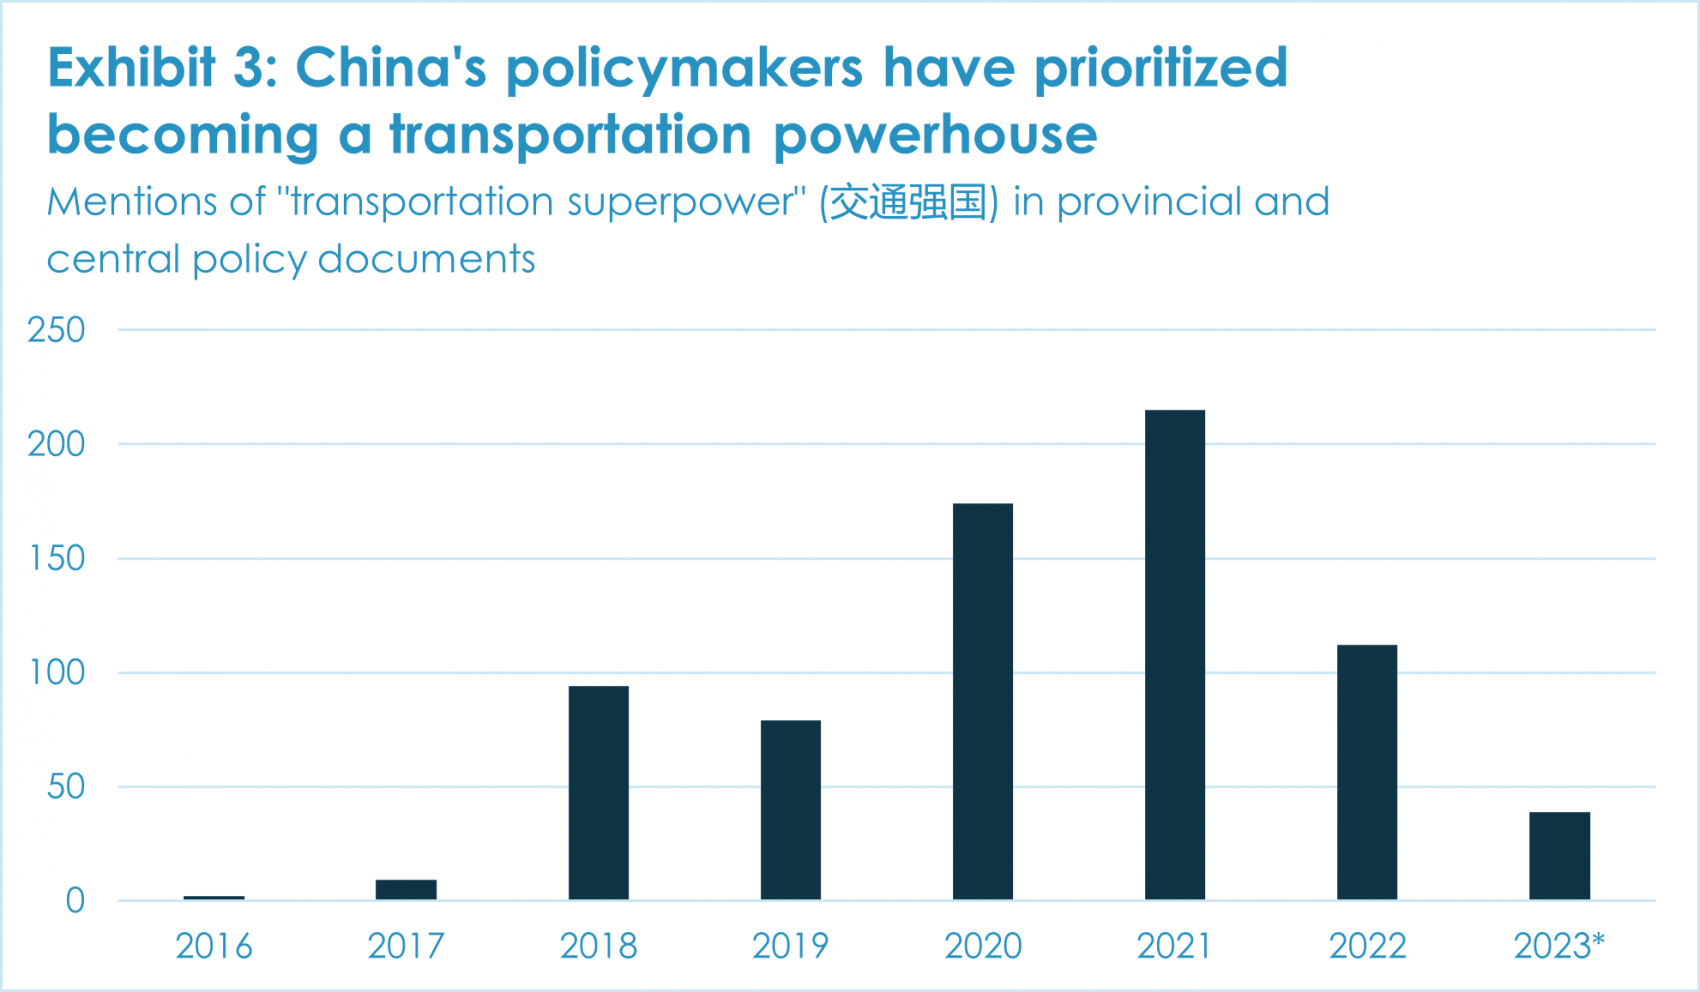 Exhibit 3: China's policymakers have prioritized becoming a transportation powerhouse